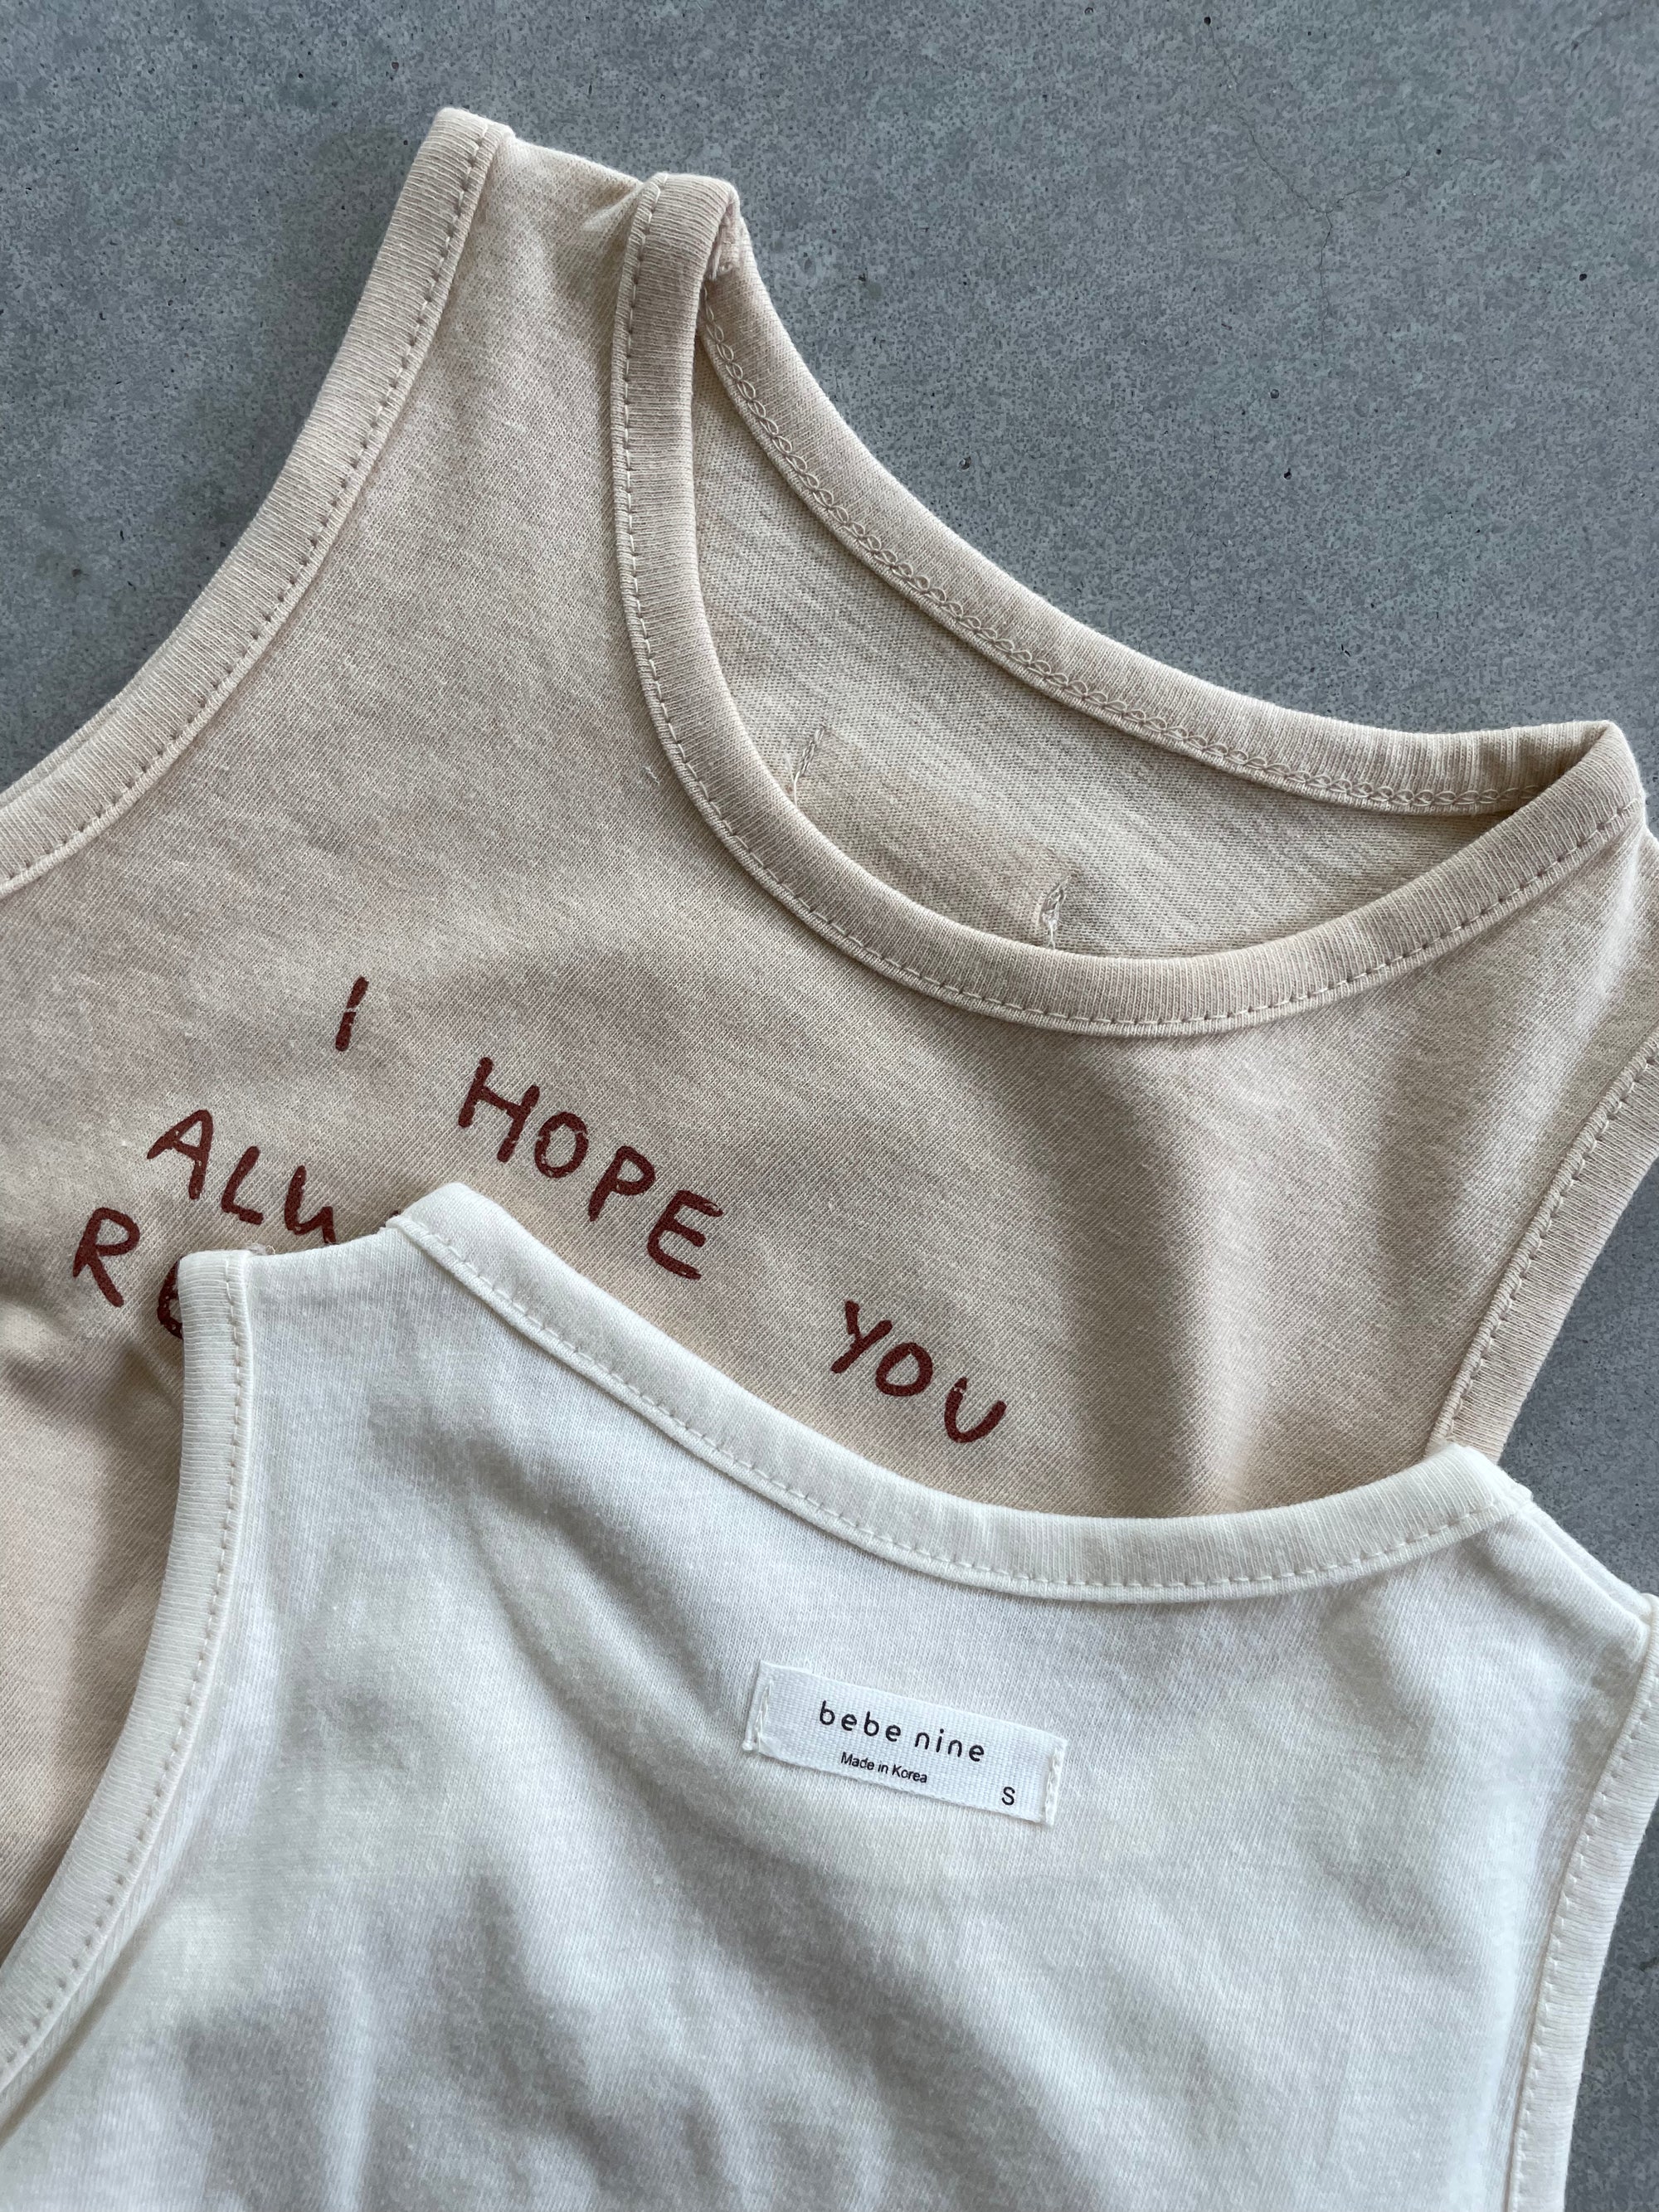 Summer tank top with quote